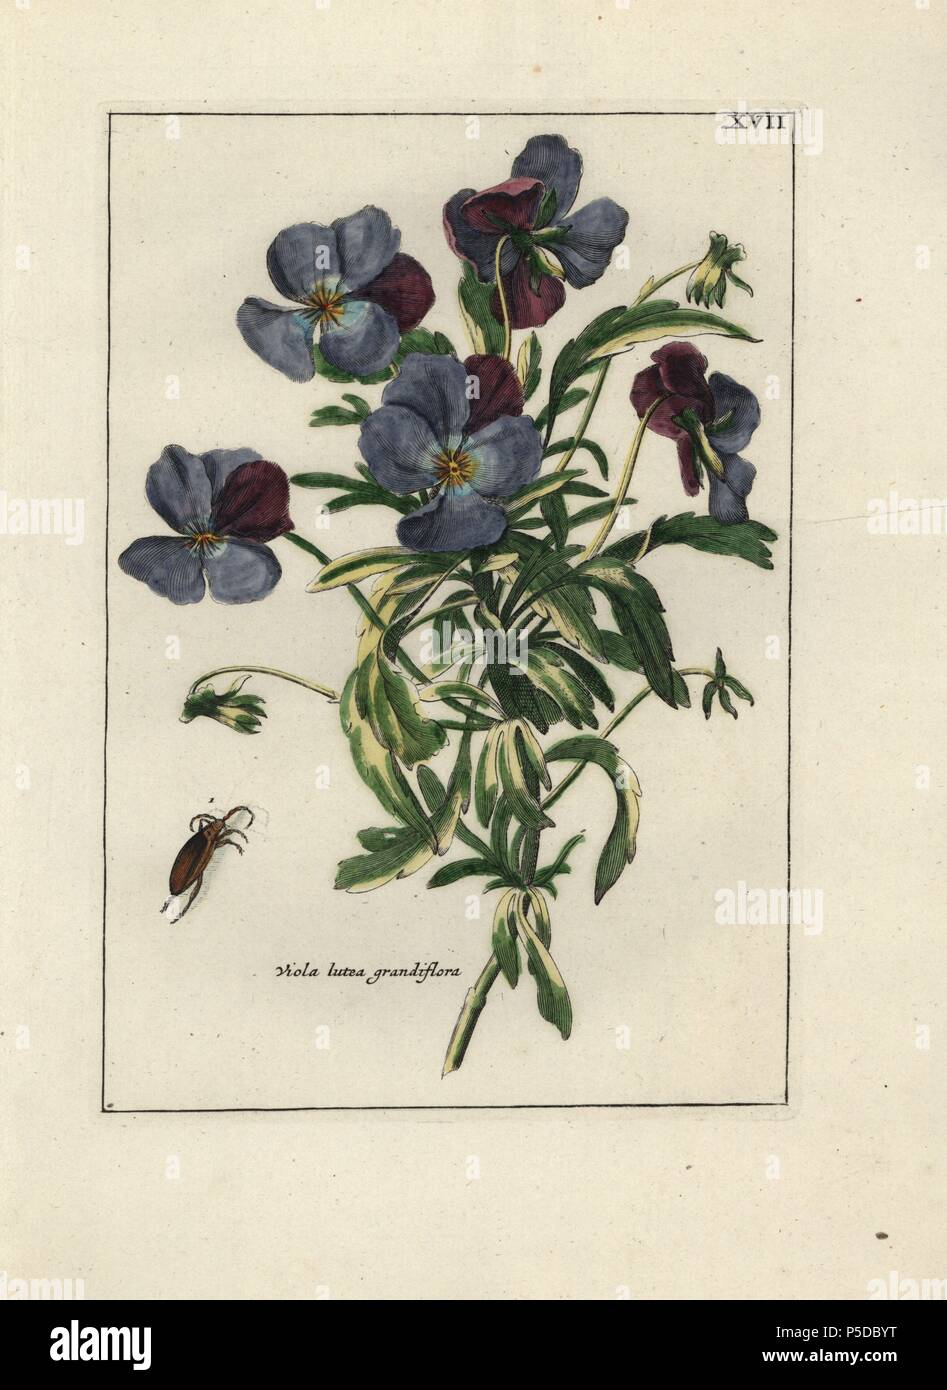 Violet, Viola lutea grandiflora, with beetle. Handcoloured copperplate botanical engraving from 'Nederlandsch Bloemwerk' (Dutch Flower Arrangements), Amsterdam, J.B. Elwe, 1794. Illustration copied from a work by one of the outstanding French flower painters of the 17th century, Nicolas Robert (1614-1685), entitled 'Variae ac multiformes florum species.. Diverses fleurs,' Paris, 1660. Stock Photo